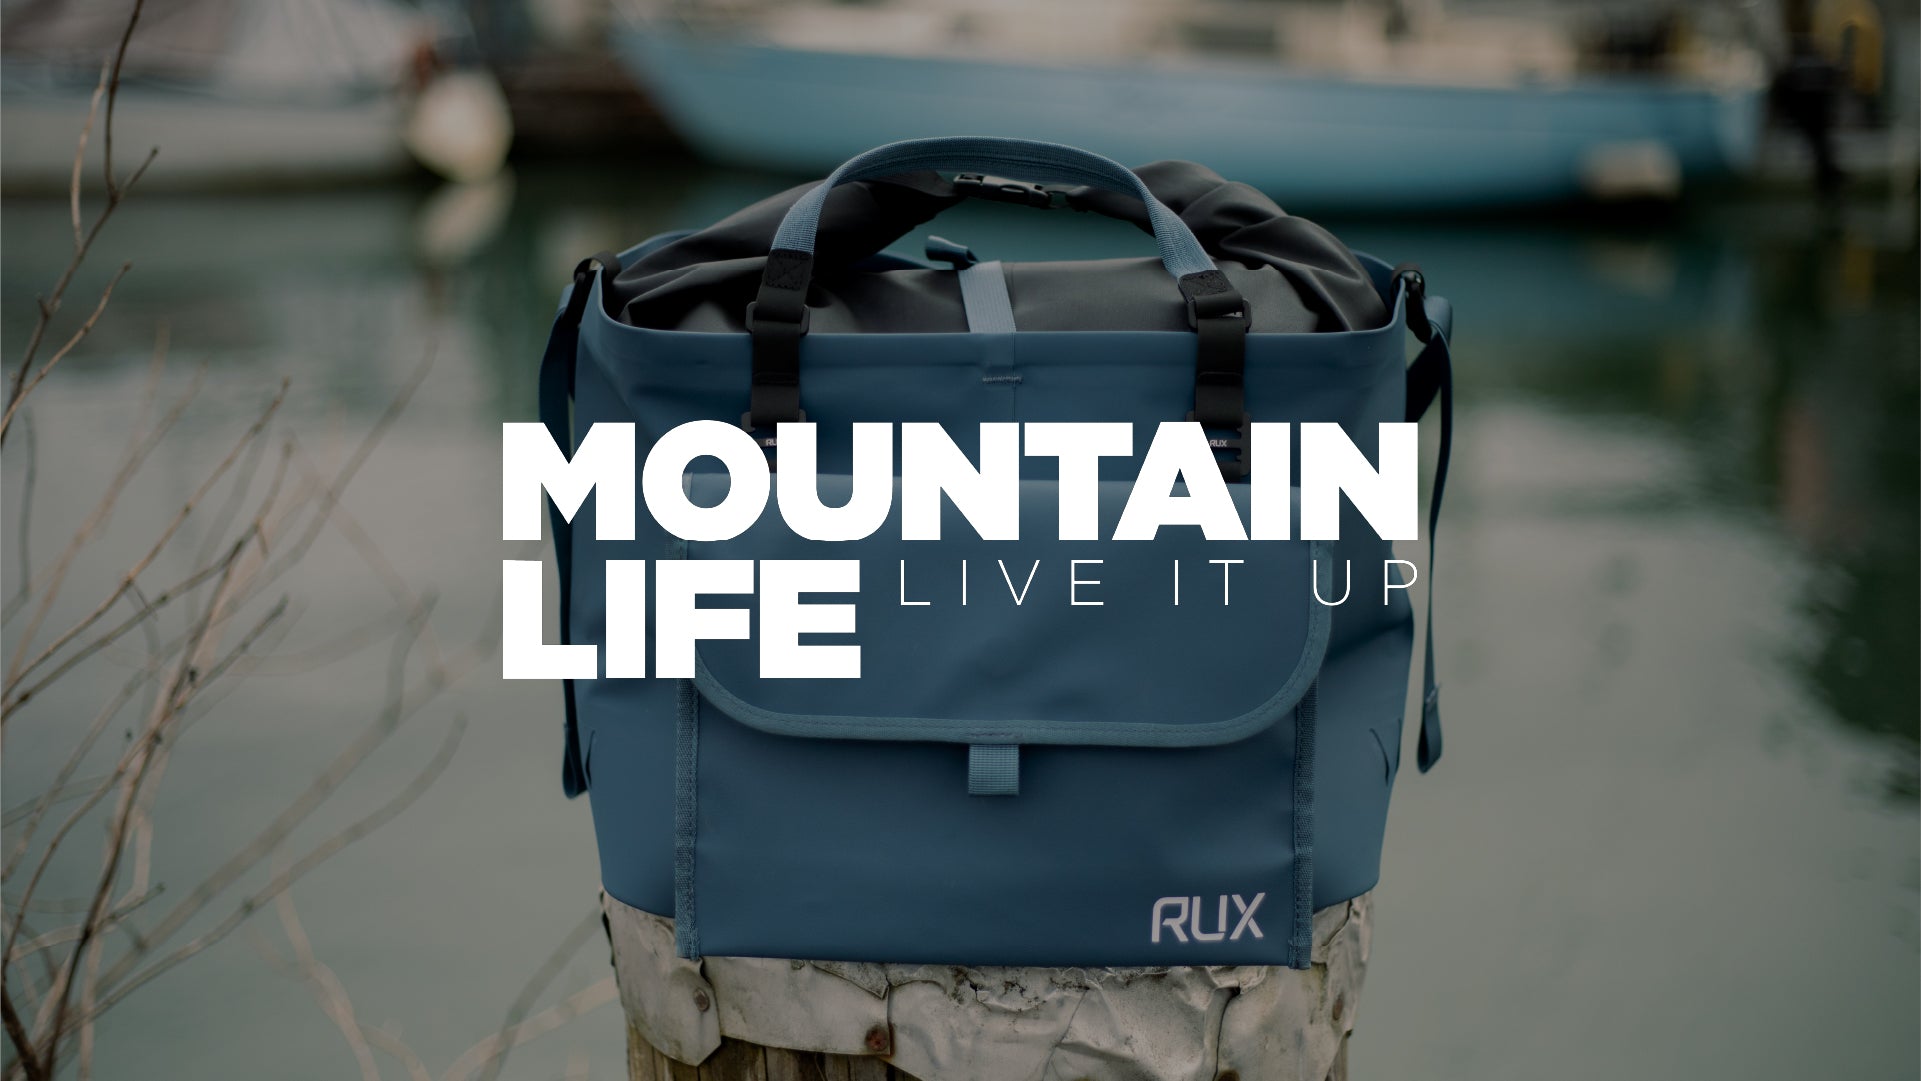 The RUX Waterproof Bag was Featured in Mountain Life!